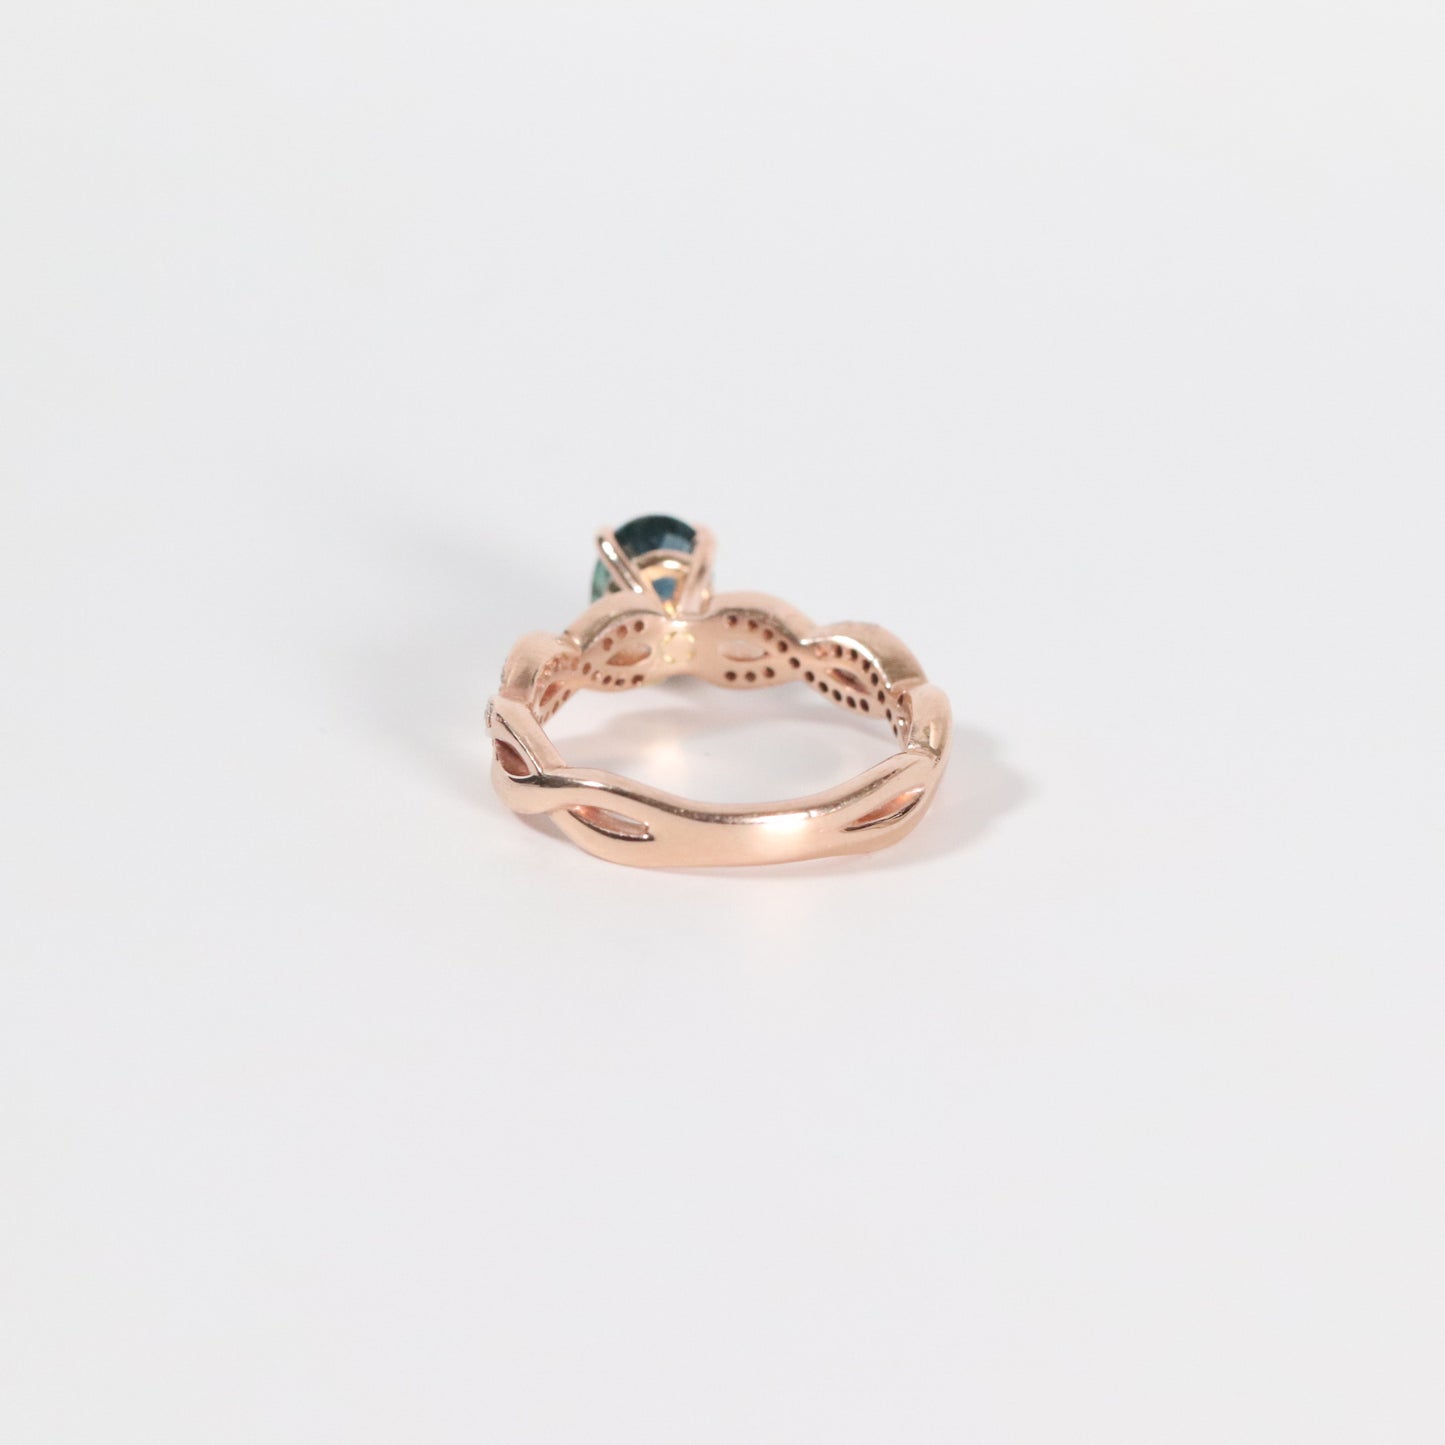 ‘Willow’ Ring- Oval MT Sapphire